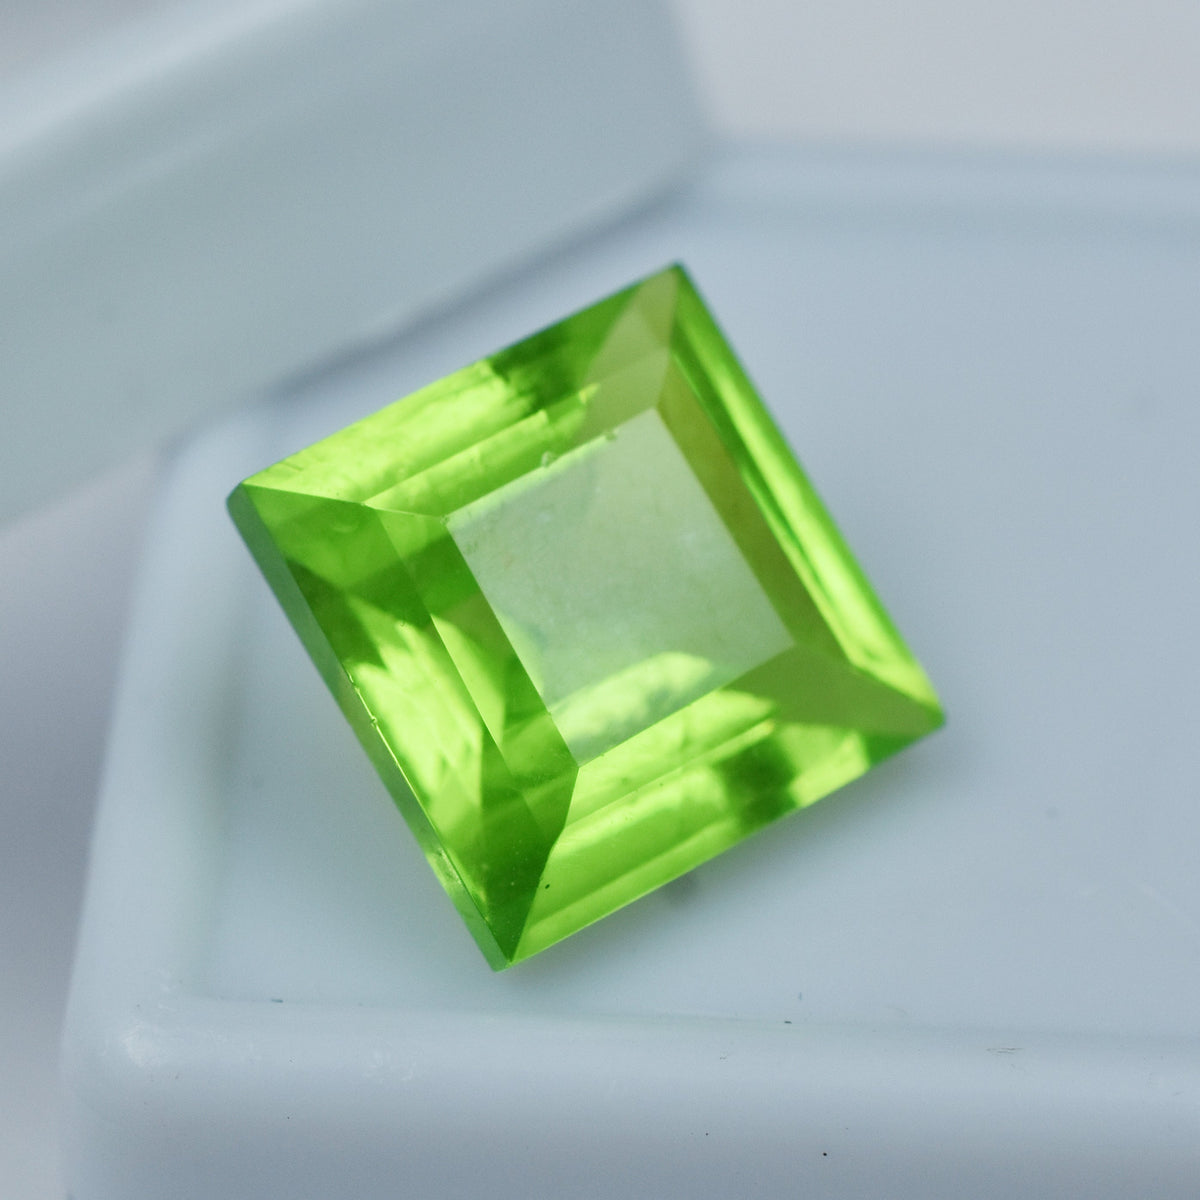 Free Shipment With Gift , August Month Birth Stone Gem 8.65 Carat Green Peridot Square Shape Natural Certified Loose Gemstone | Best Offer | Brilliant Cut